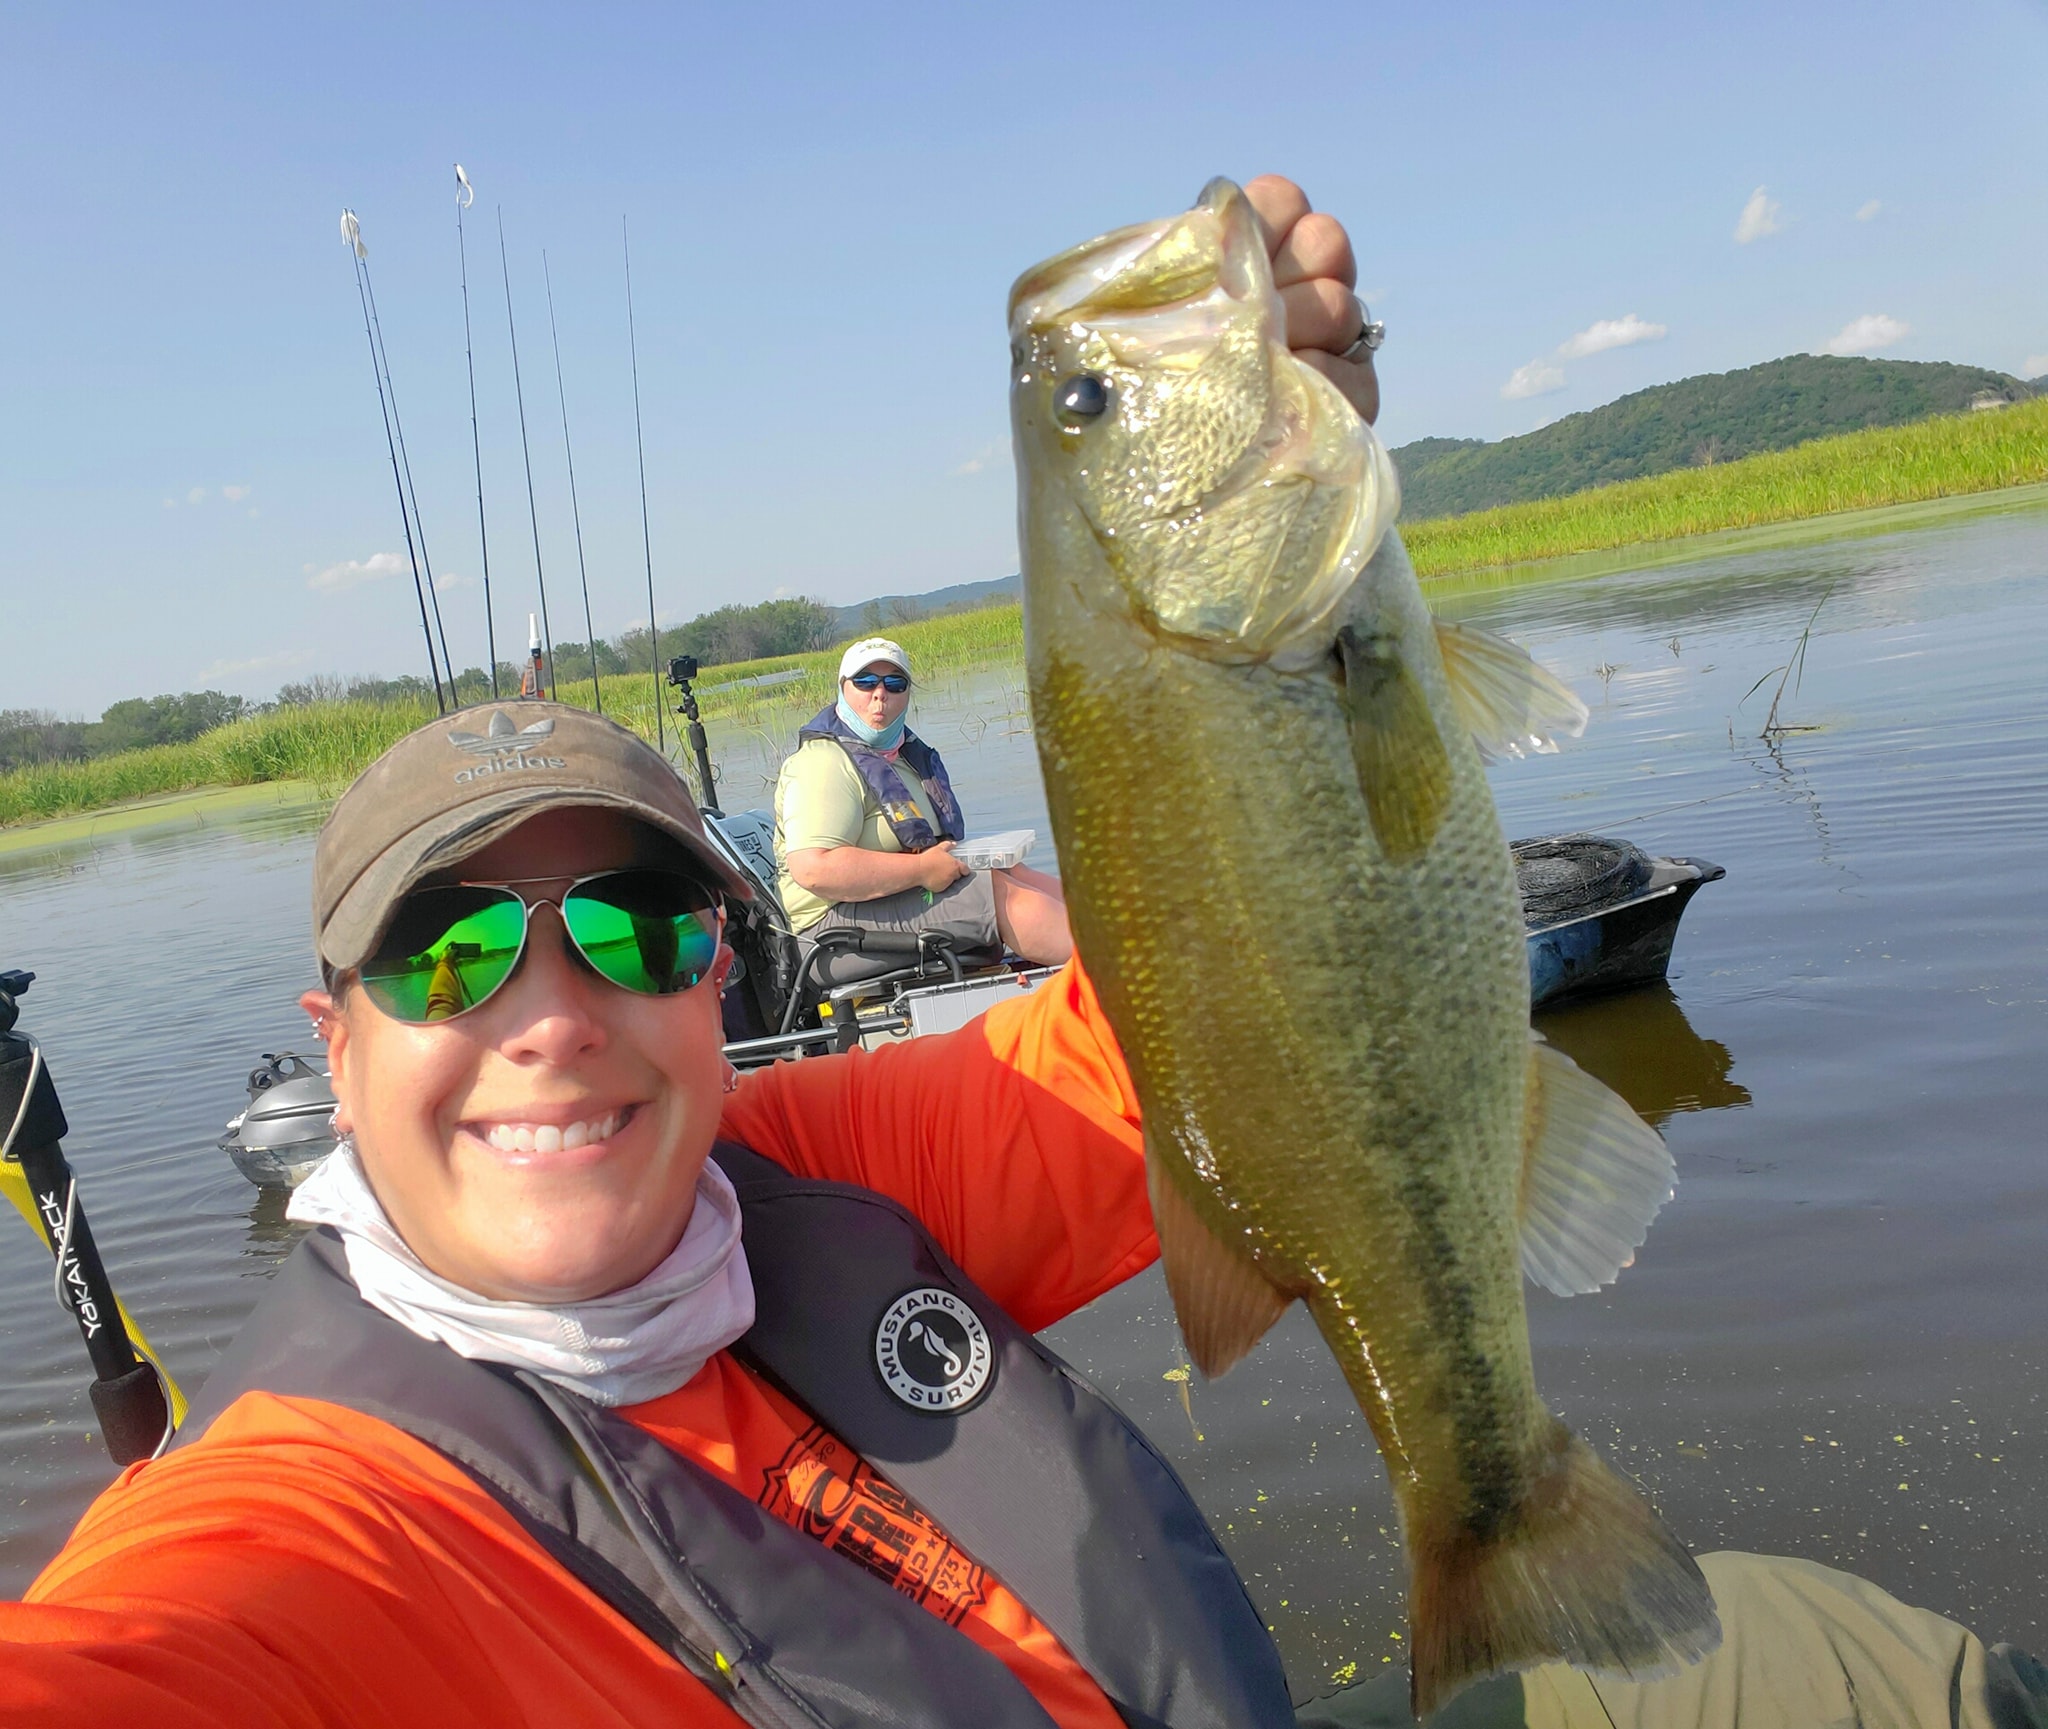 Susie photobombing Katie holding up a big largemouth bass